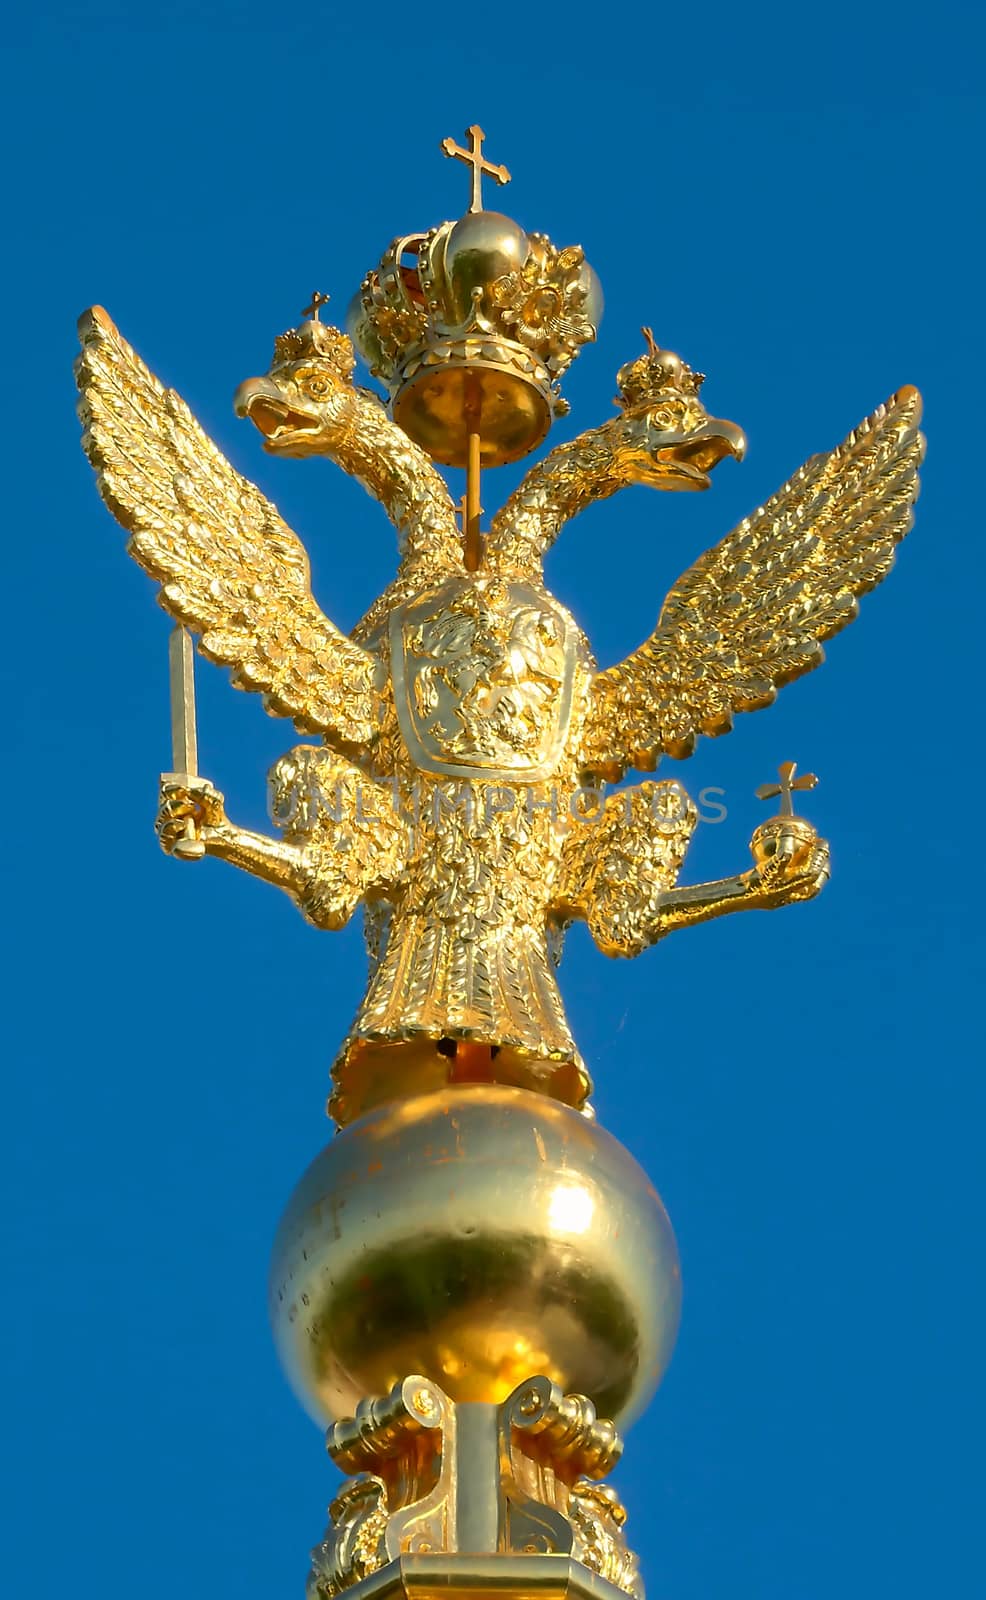 Two-headed golden eagle on the steeple in the Peterhof Palace against the blue sky